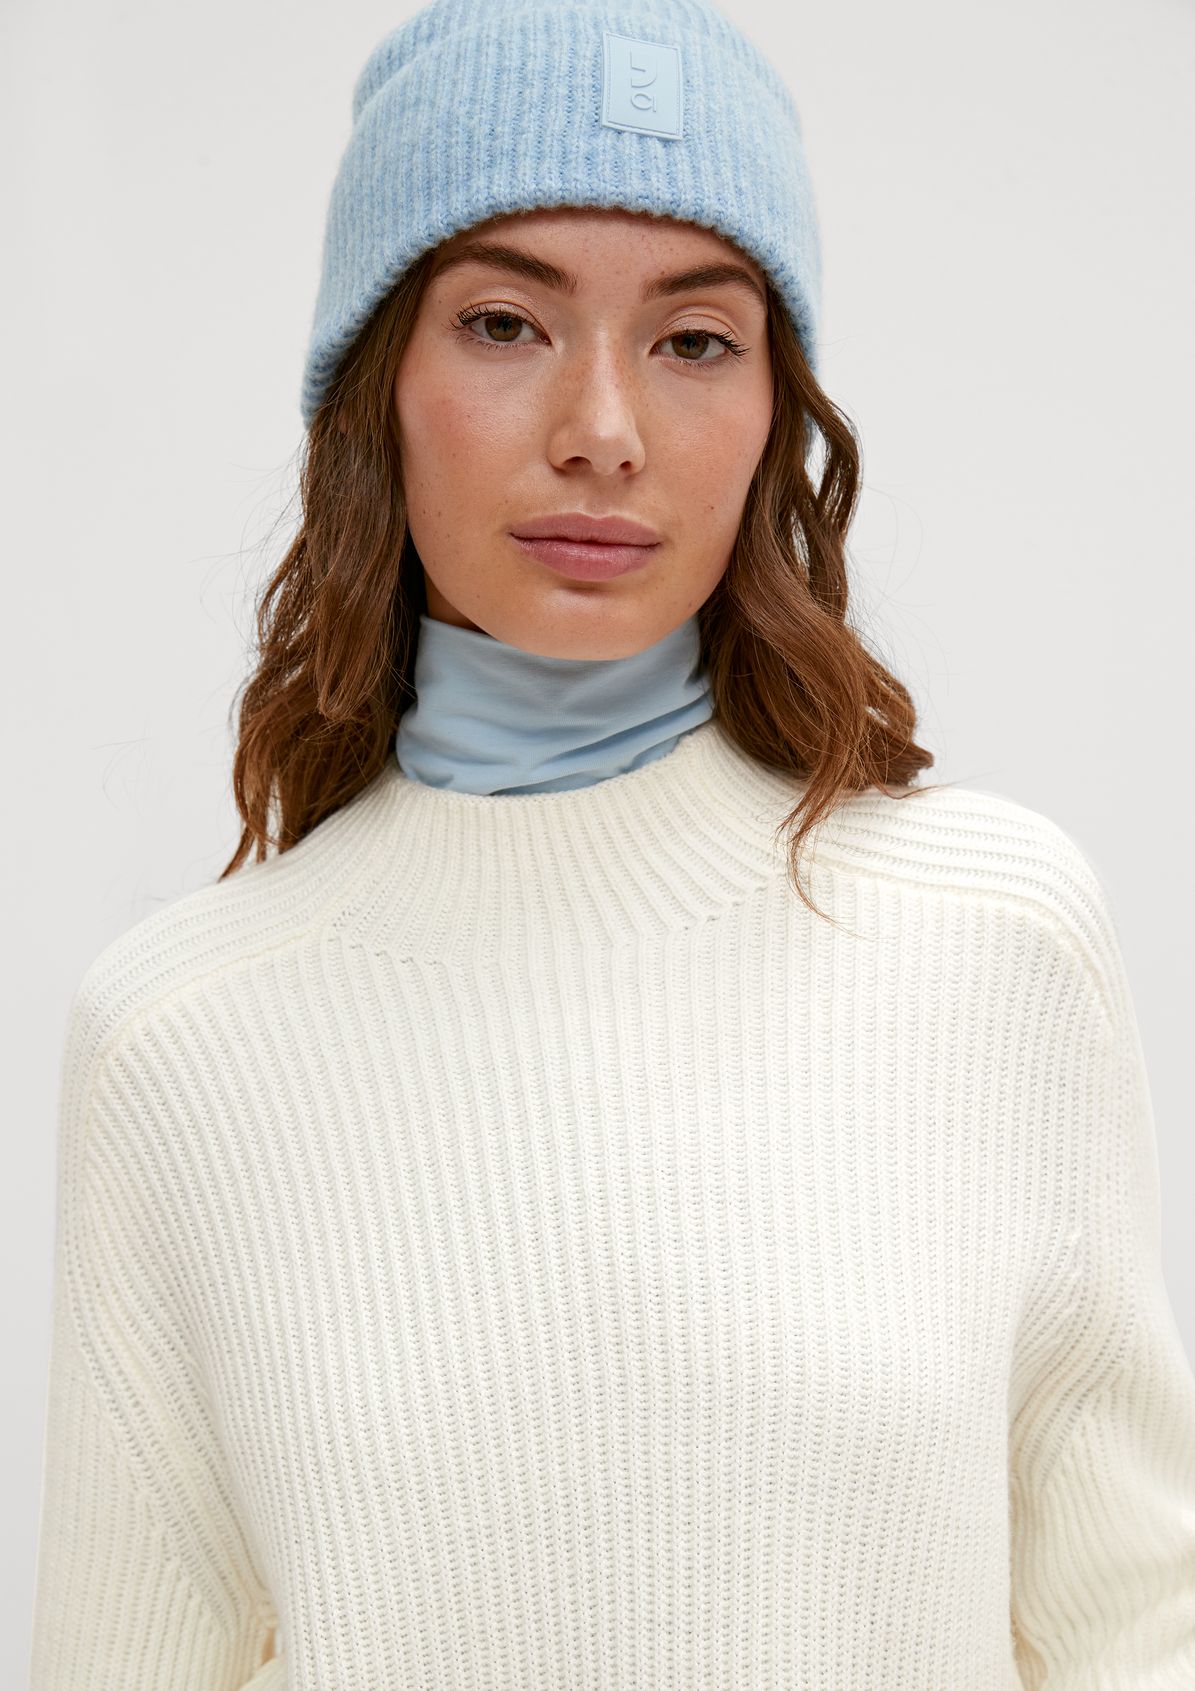 Rib knit jumper in a wool blend from comma